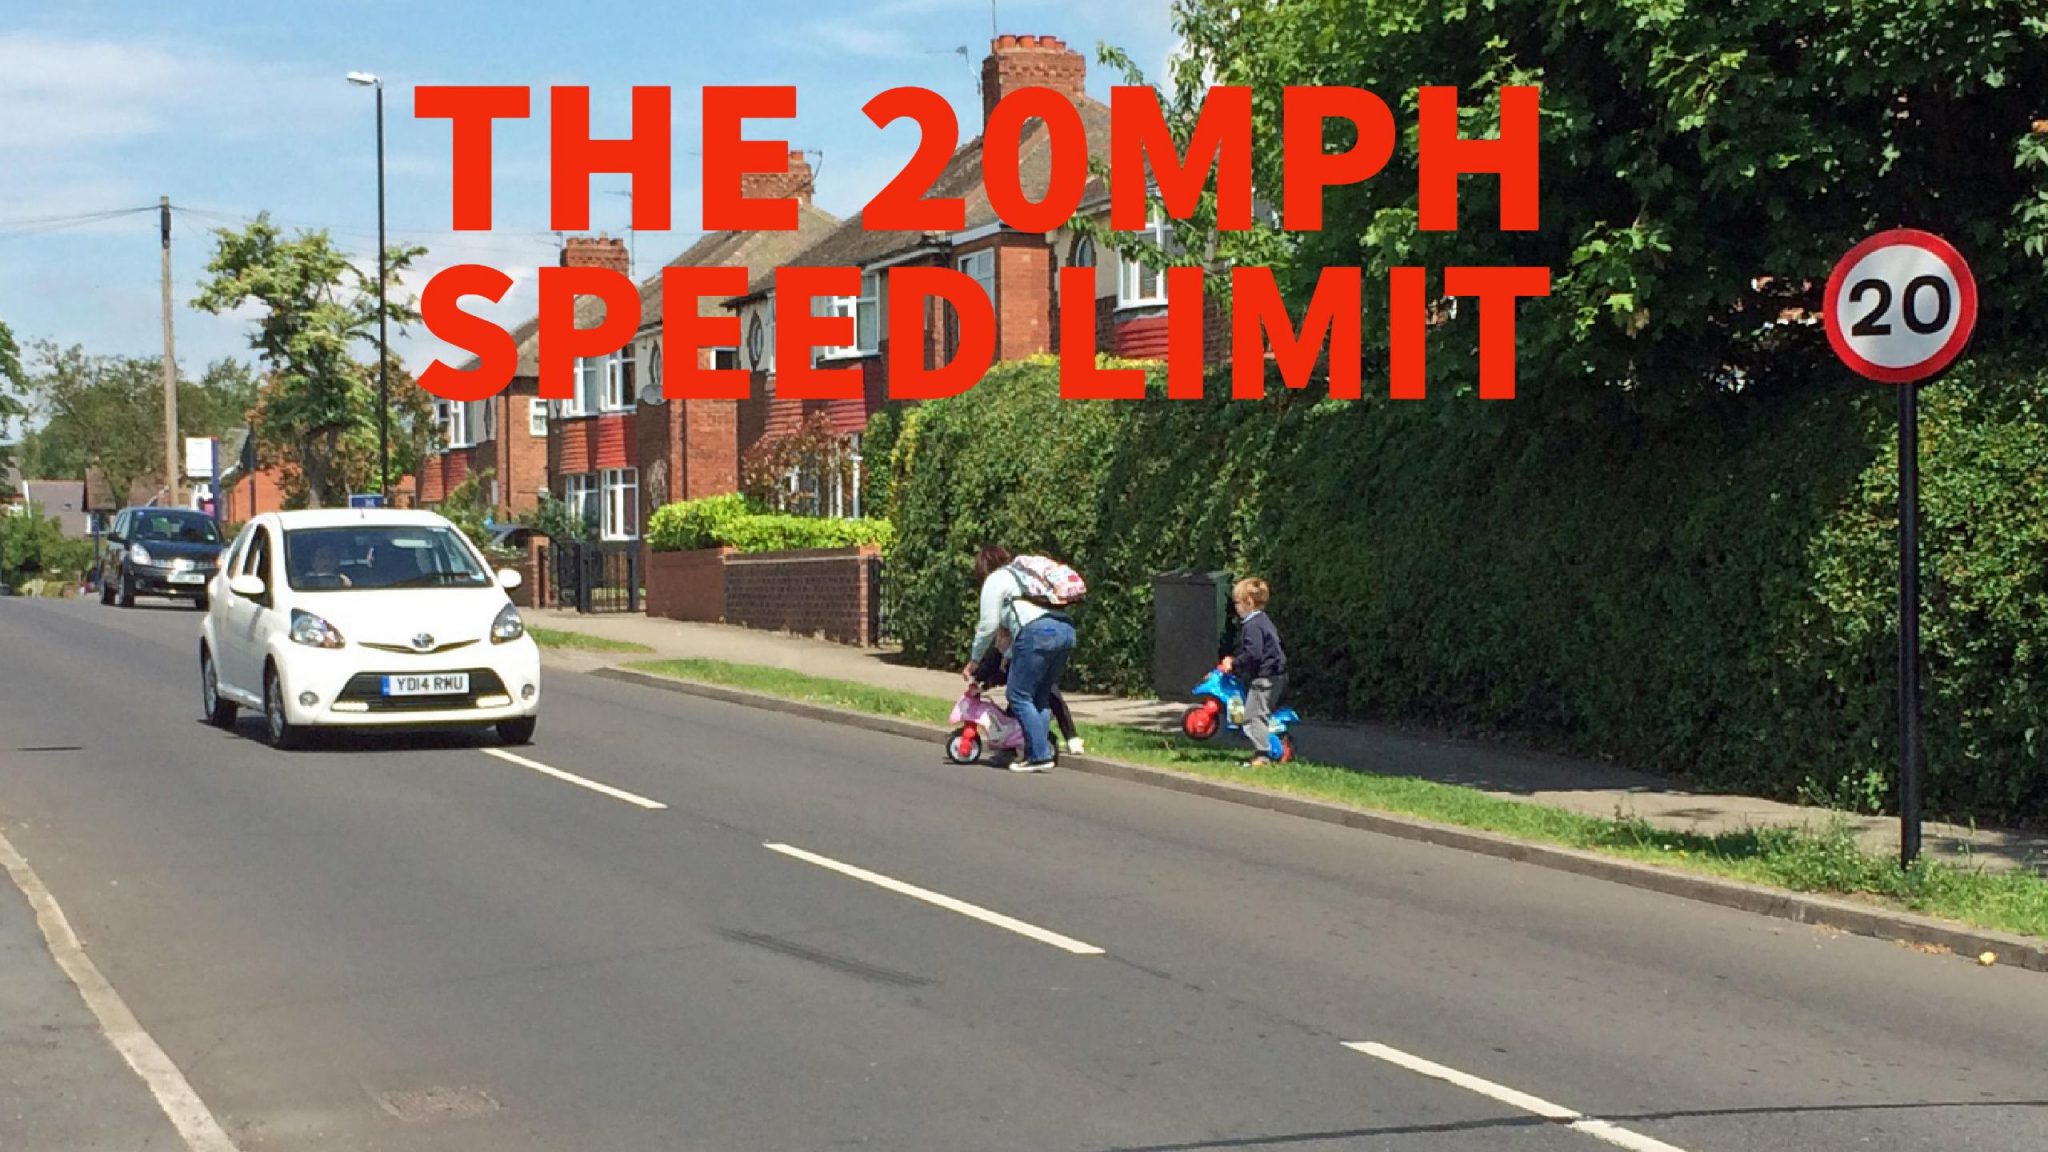 The 20mph Speed Limit